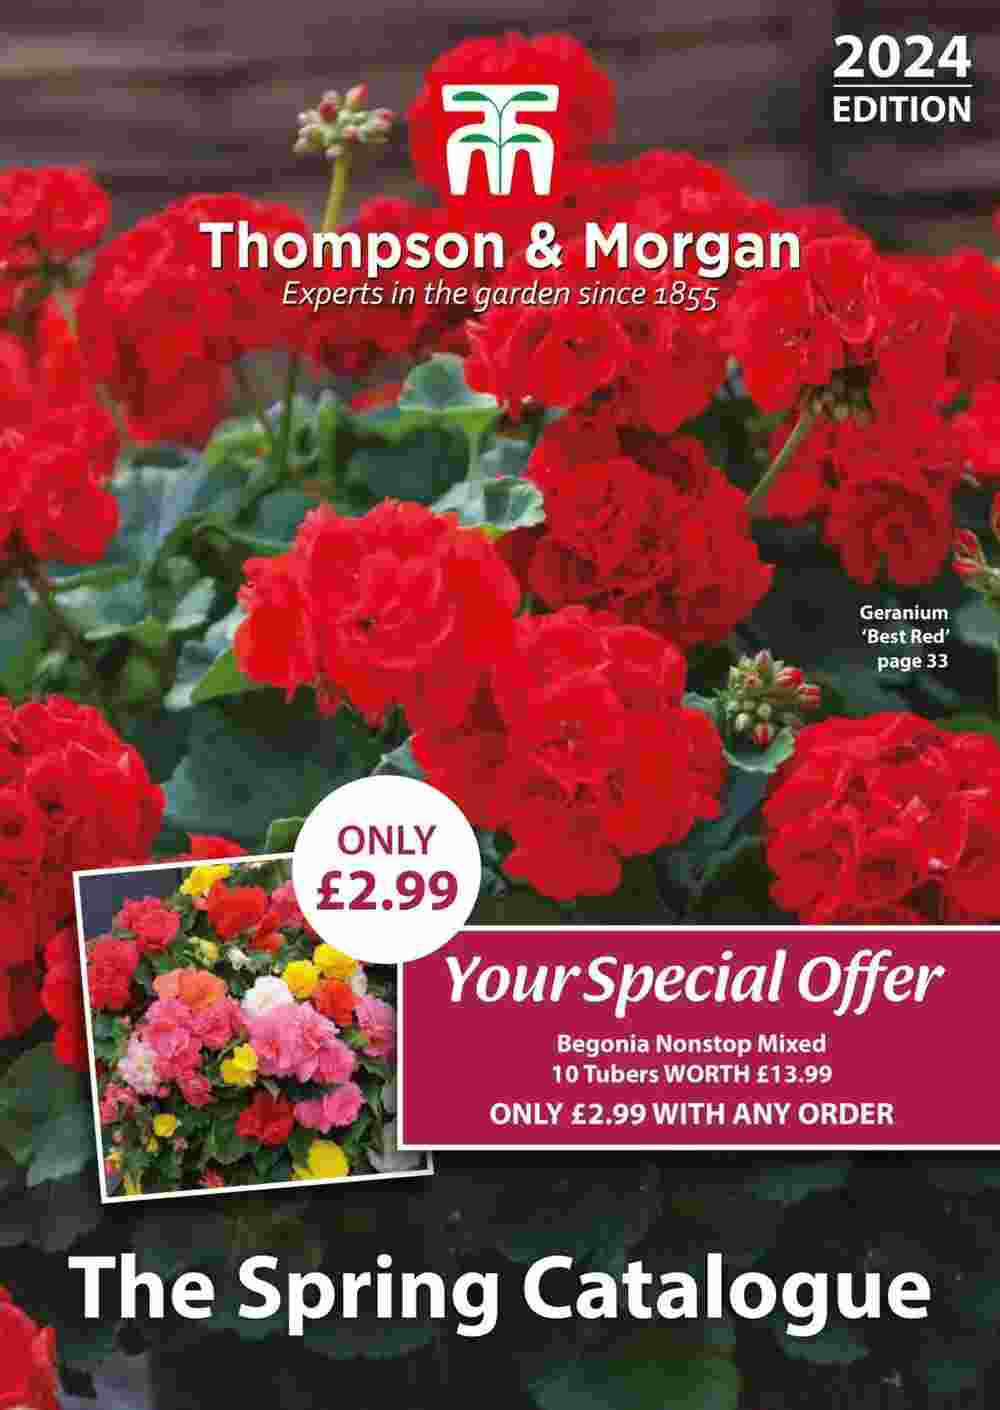 Thompson & Morgan offers valid from 01/03/2024 - Page 2.